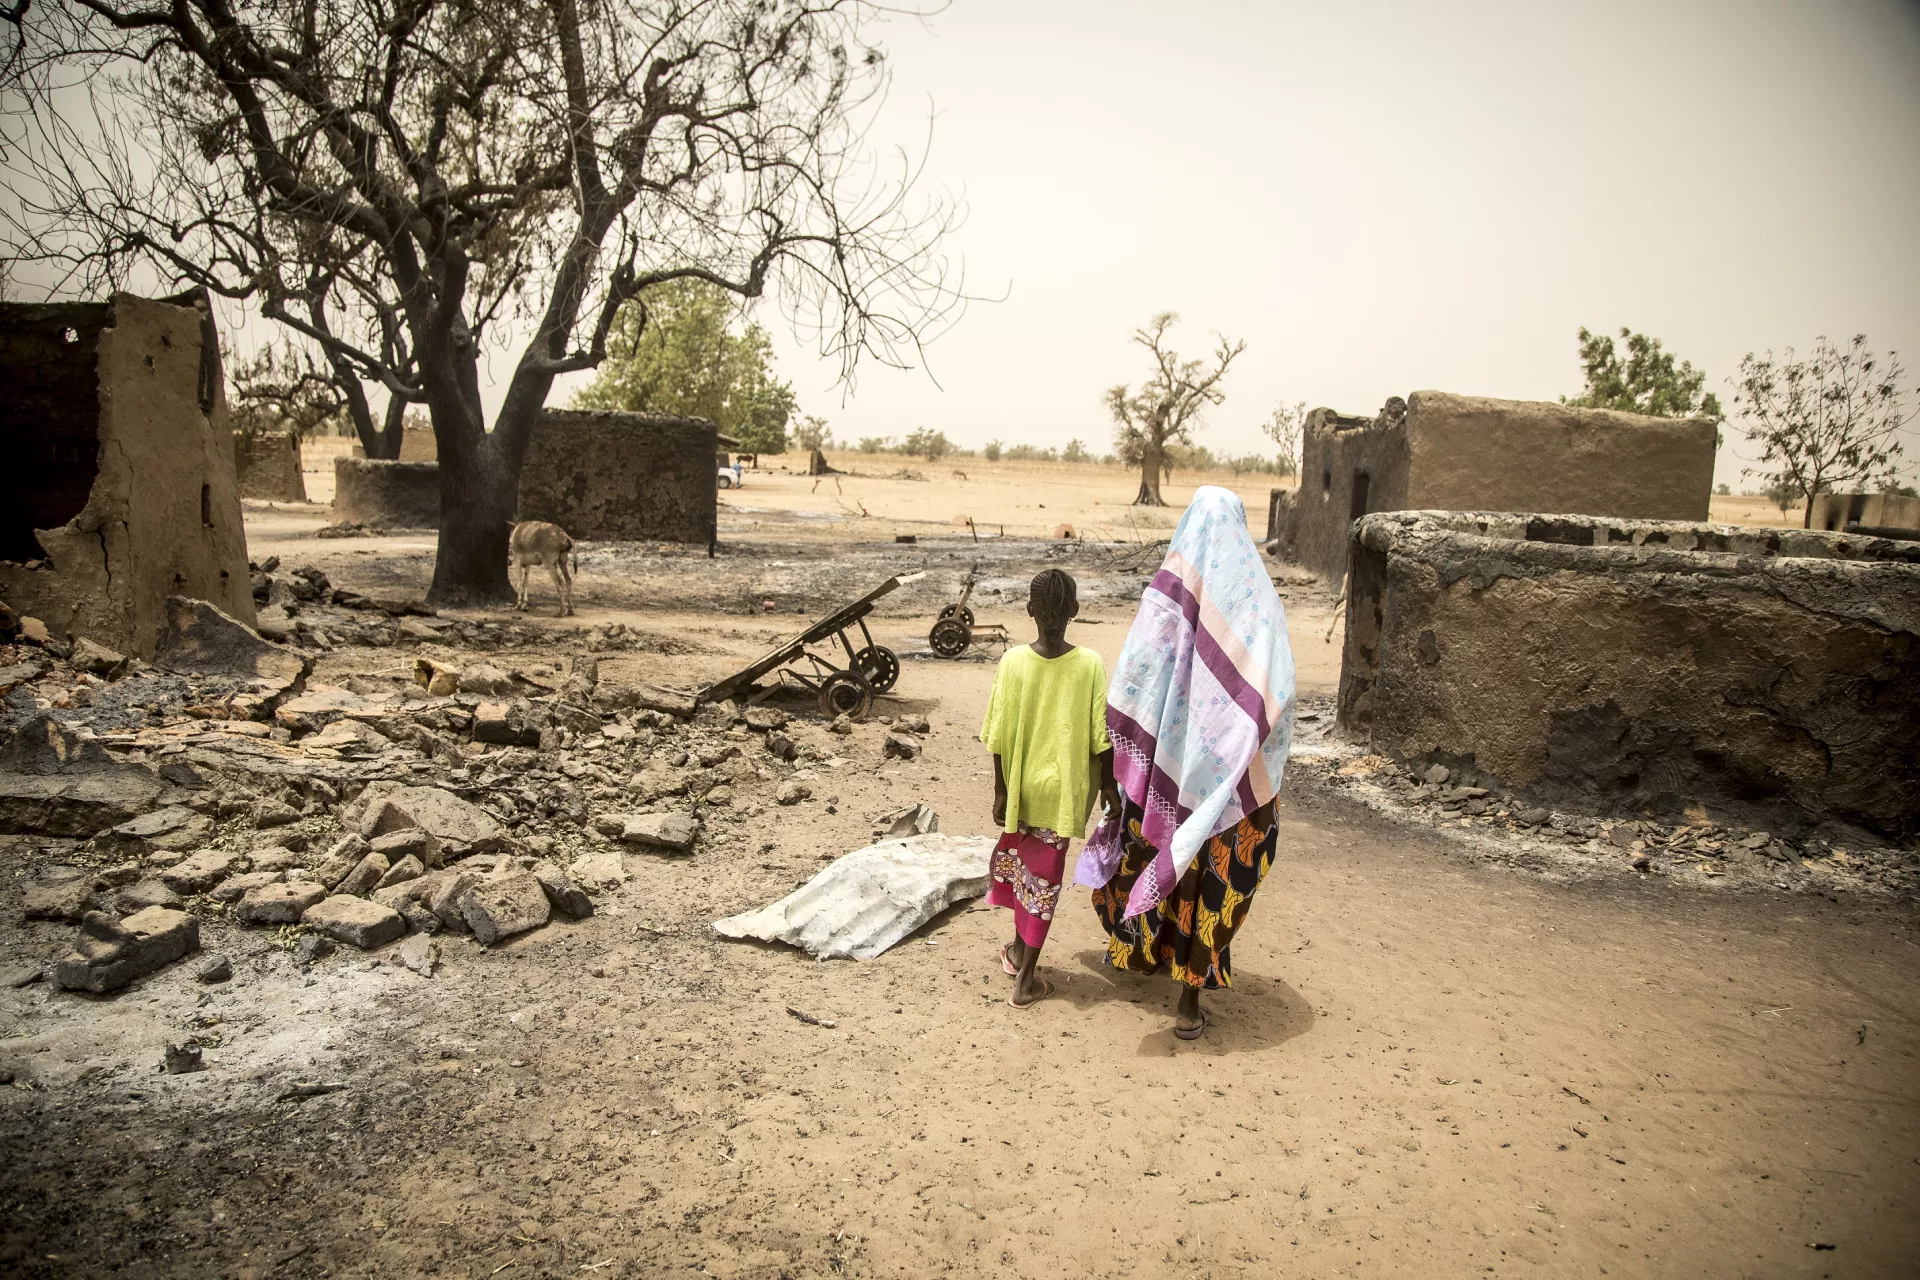 Mali. A woman walks through the remains of a village holding a child's hand.